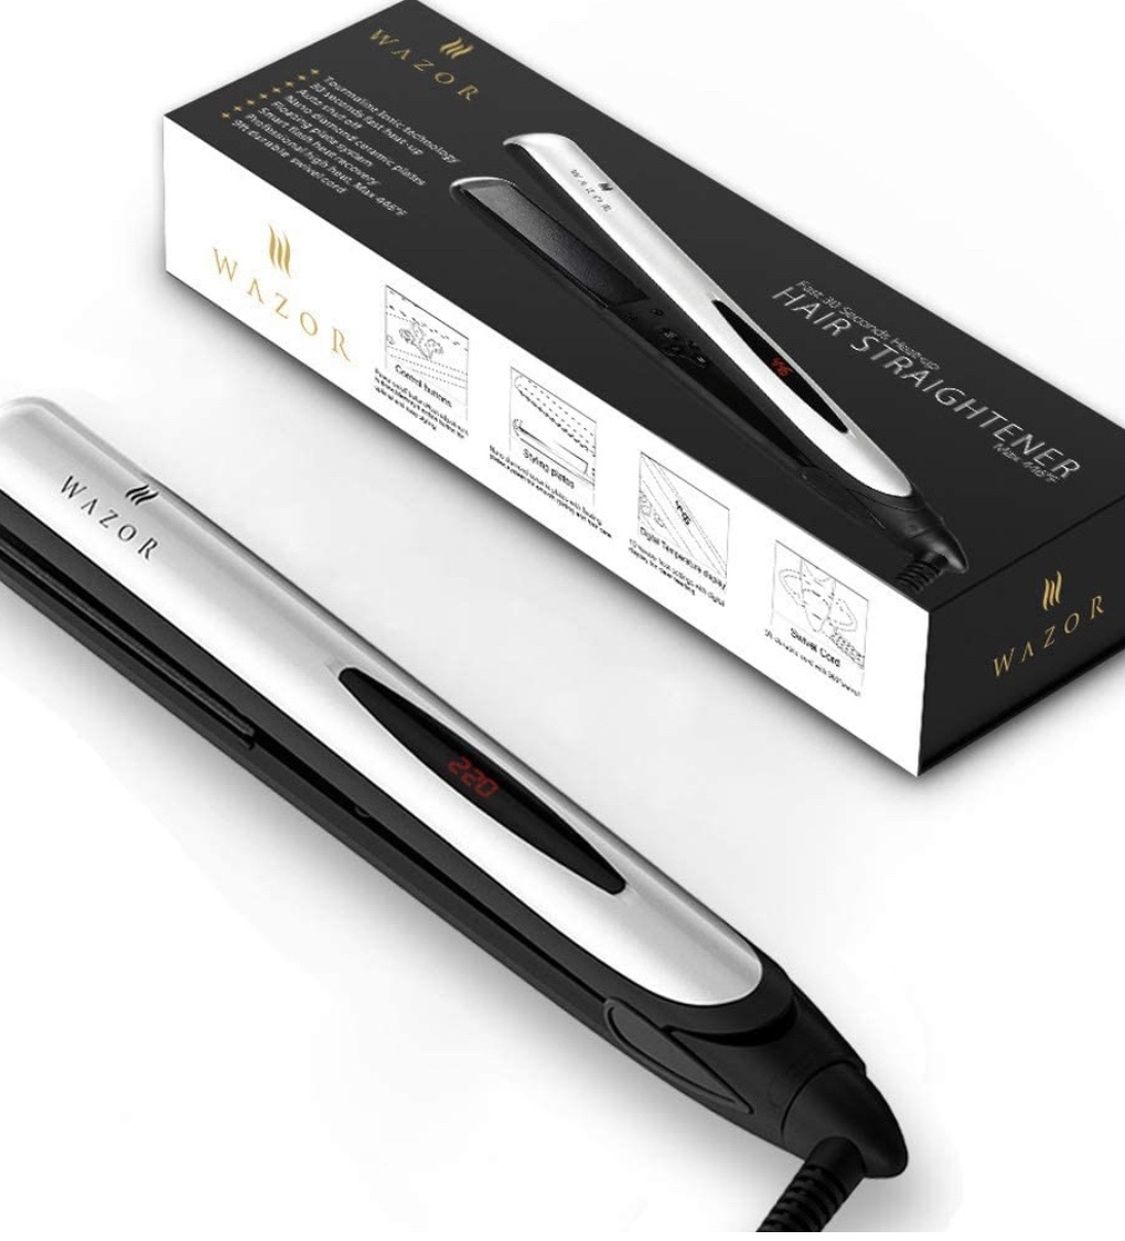 Wazor Hair Straightener, 2 in 1 Flat Iron Professional Ceramic Hair Straightening Iron Instant Heat Up Automatic Shut Off and Digital LCD Display 1 In